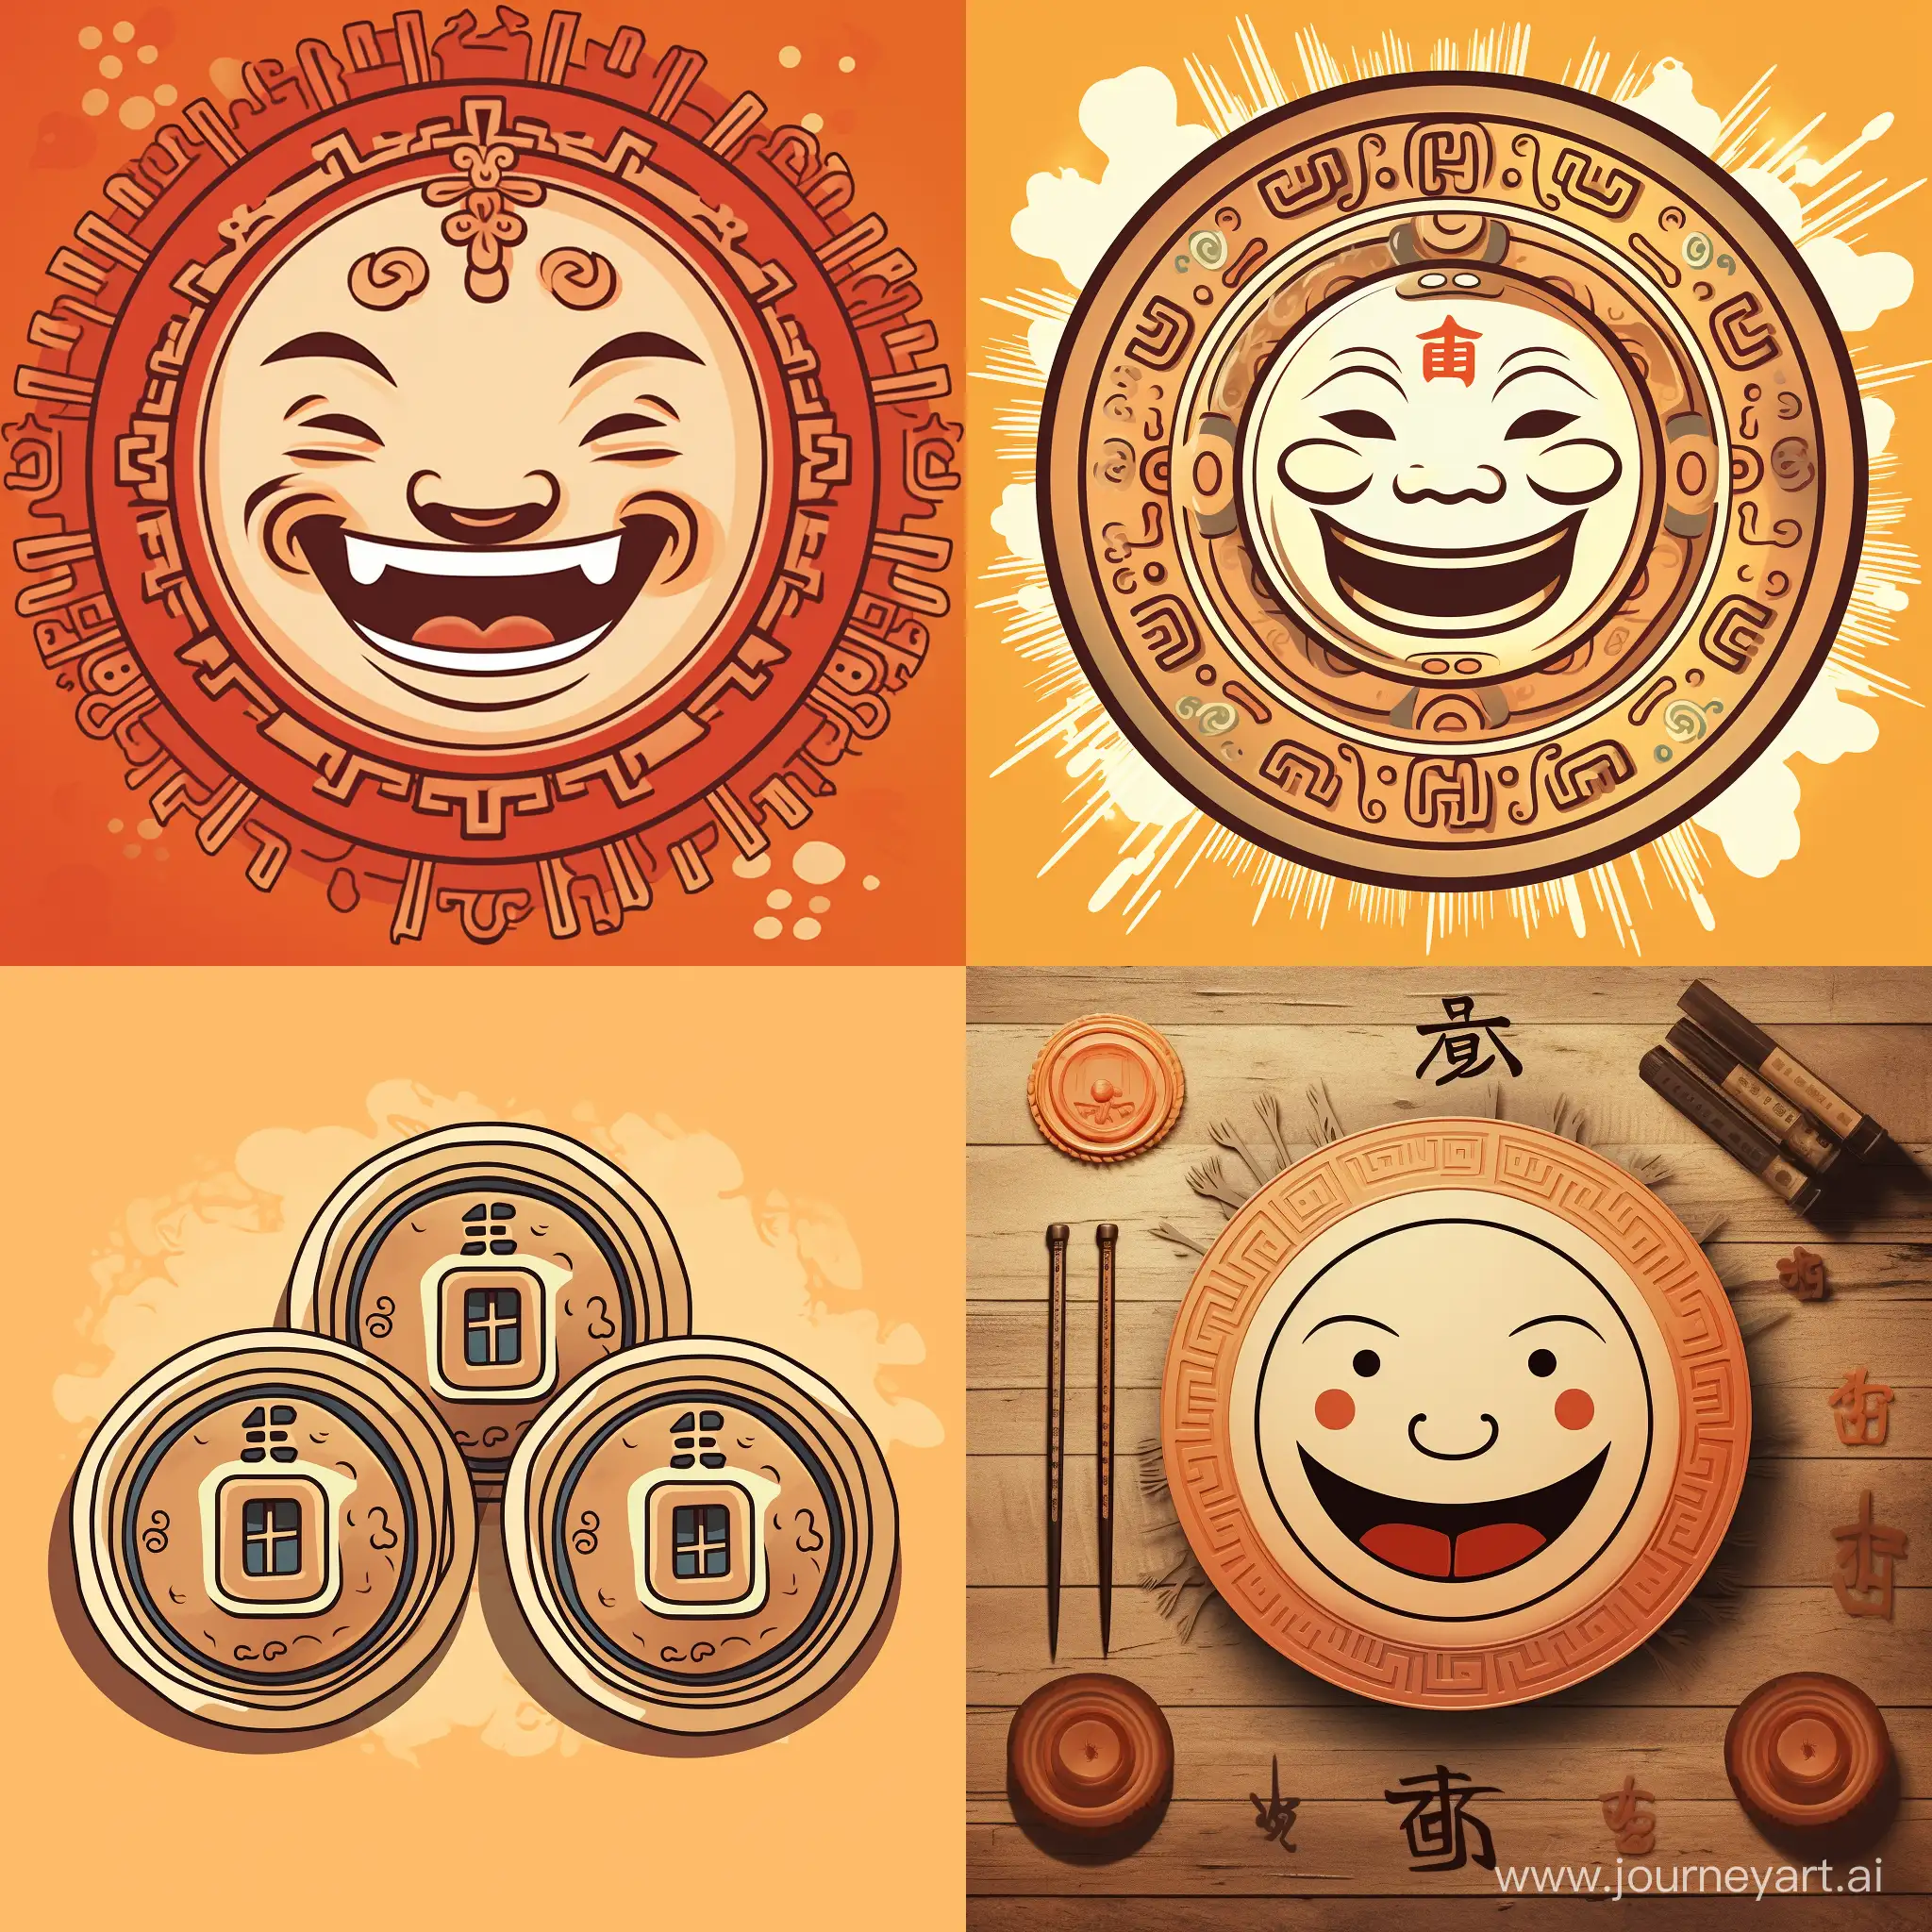 Smiling-Chinese-Copper-Coin-with-Characters-and-Coin-Eyes